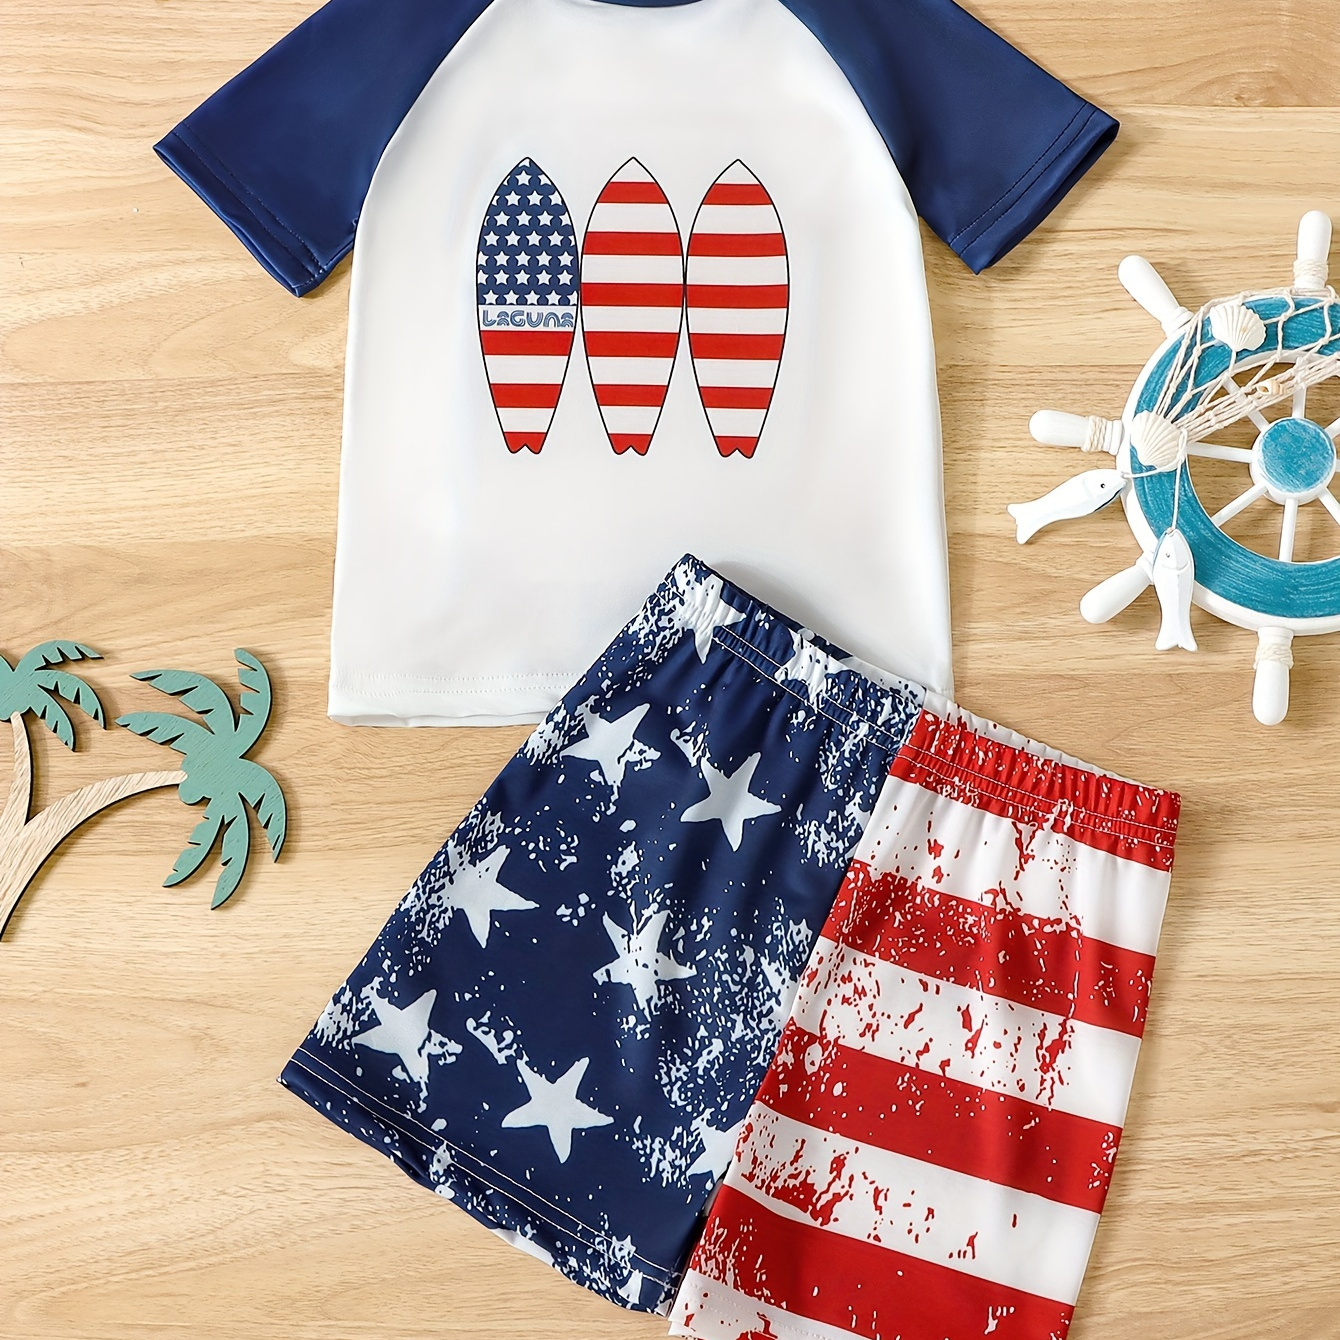 

2pcs Independence Day Surf Board Pattern Swimsuit For Boys, T-shirt & Swim Trunks Set, Stretchy Surfing Suit, Boys Swimwear For Summer Beach Vacation